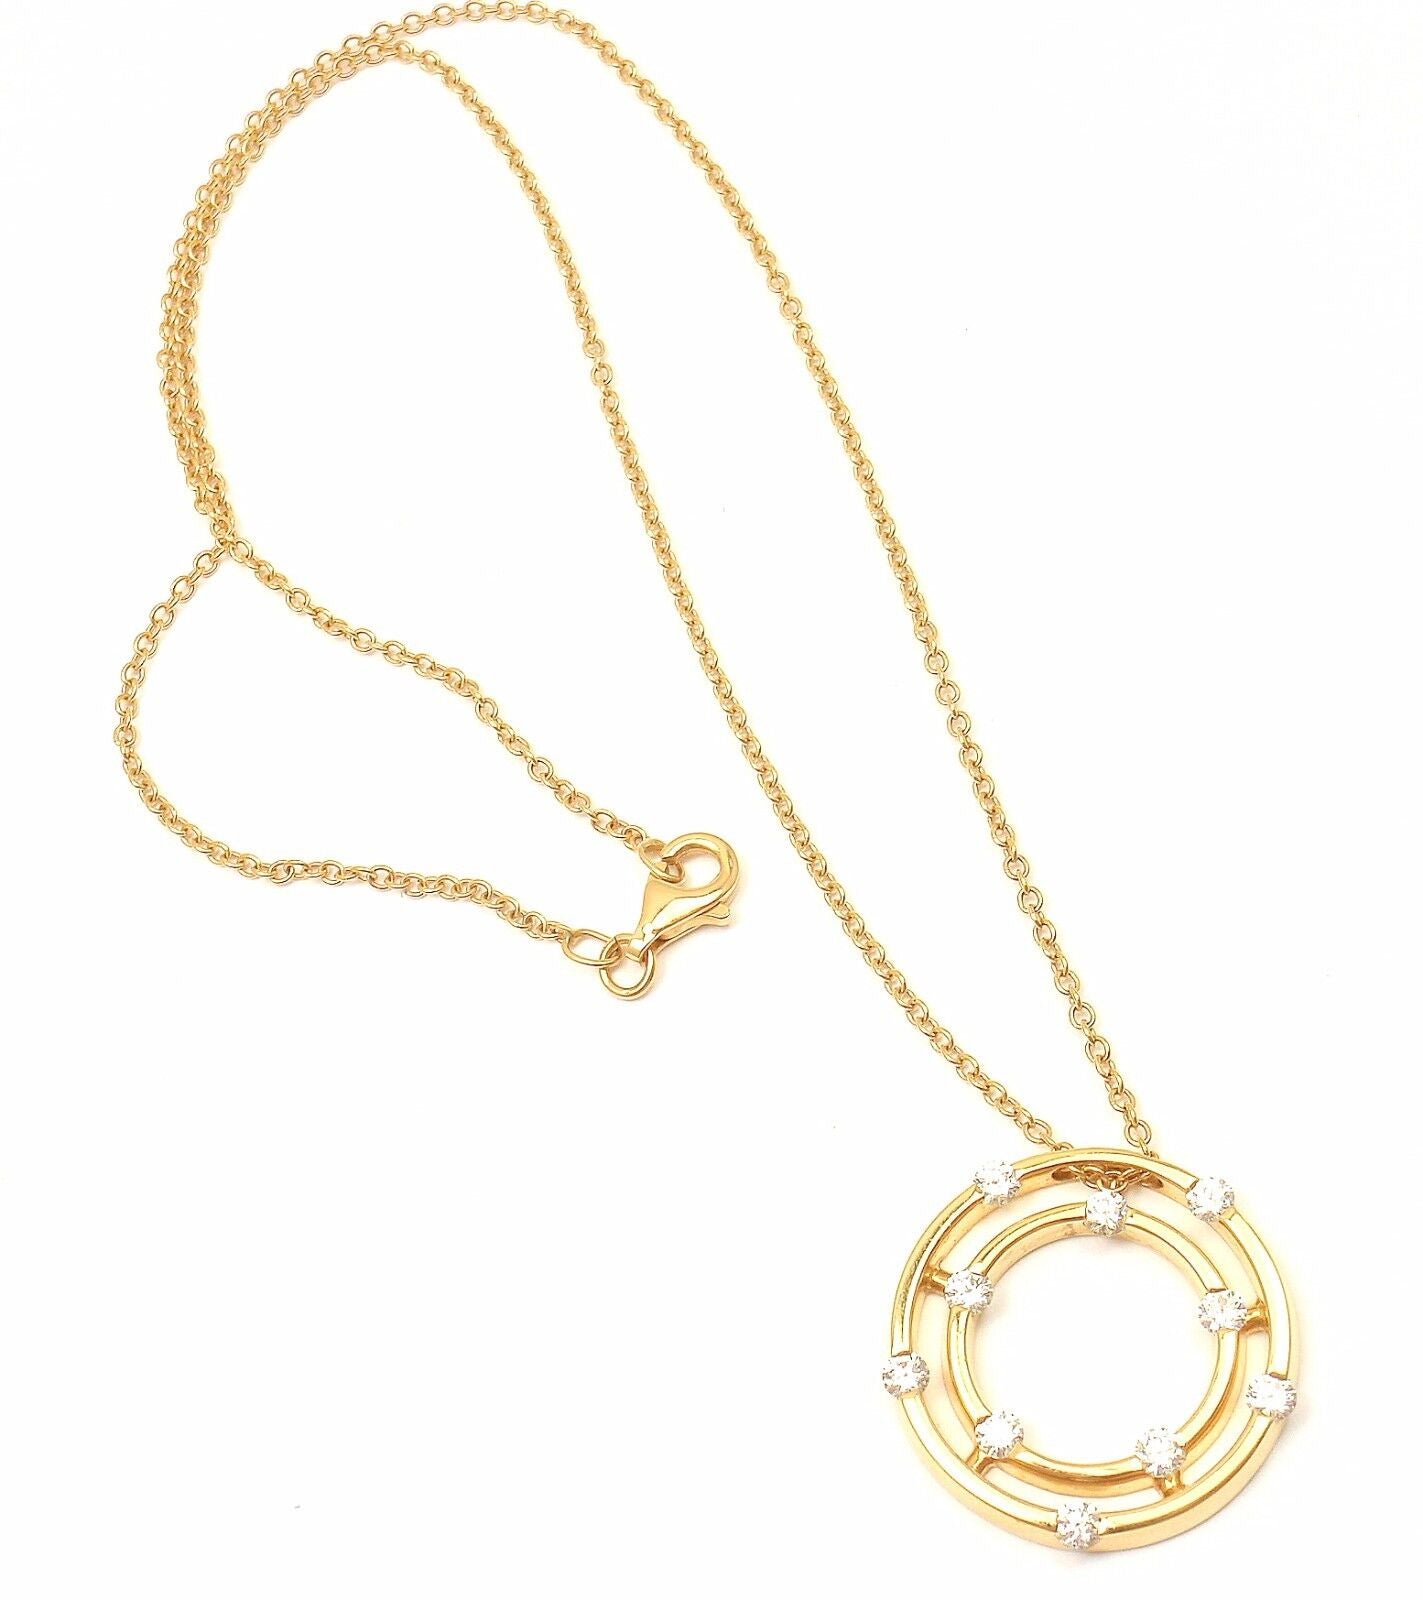 Roberto Coin Jewelry & Watches:Fine Jewelry:Necklaces & Pendants ROBERTO COIN 18K YELLOW GOLD DOUBLE HOOP DIAMOND PENDANT NECKLACE